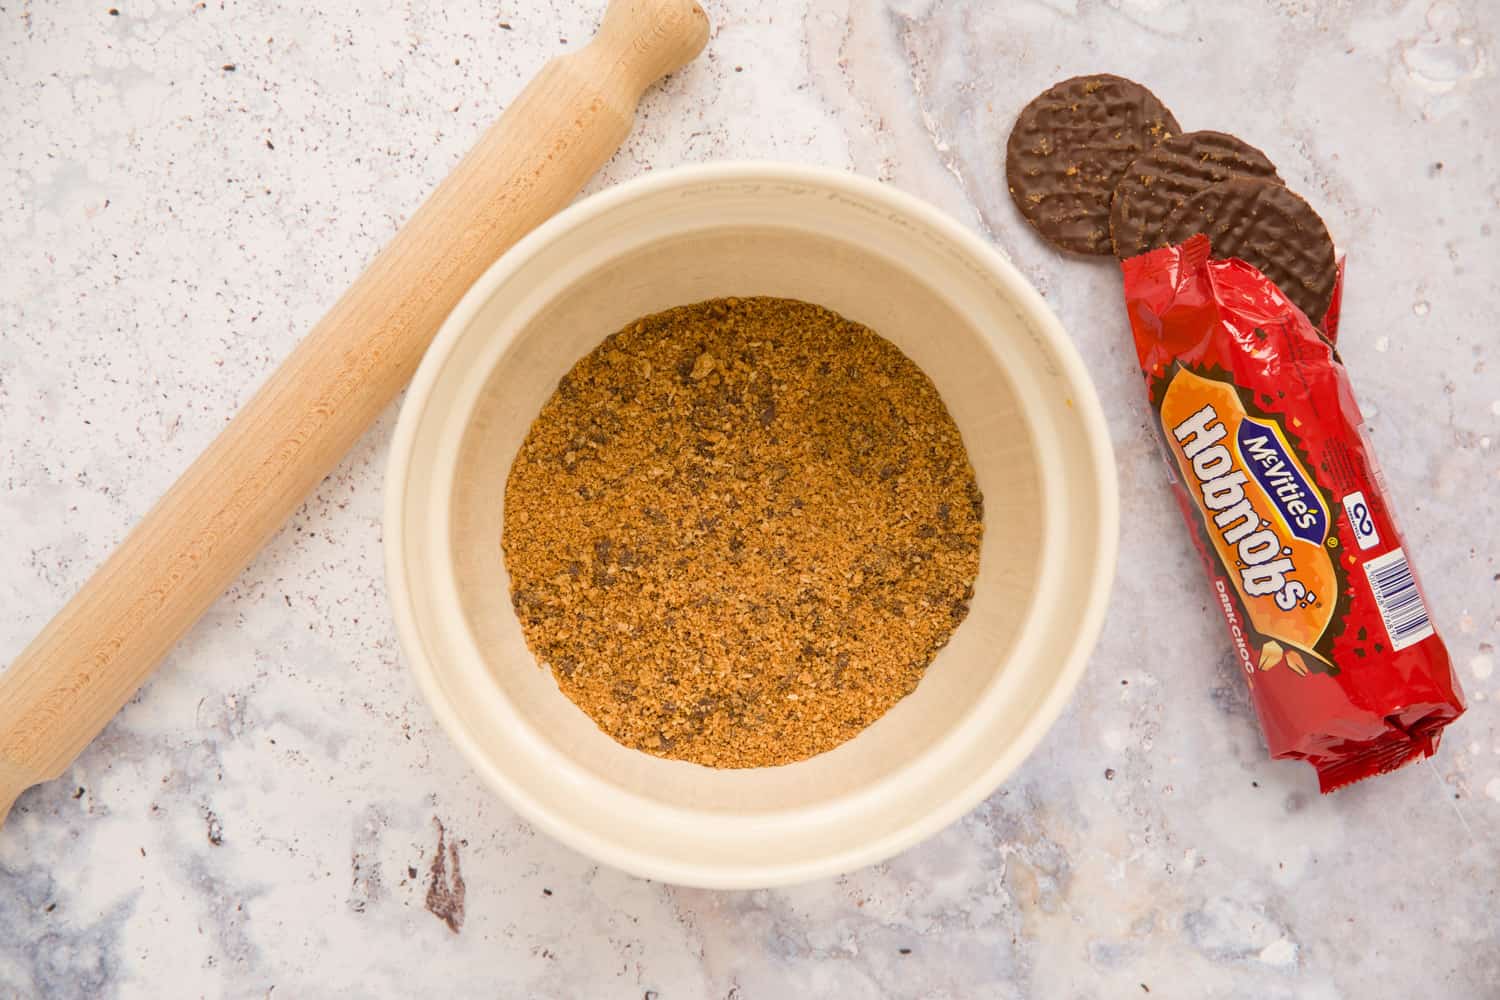 Overhead shot of a mixing bowl filled with crushed Hobnob biscuits. There is a rolling pin to the left of the bowl and a packet of chocolate Hobnob biscuits to the right of the bowl. 